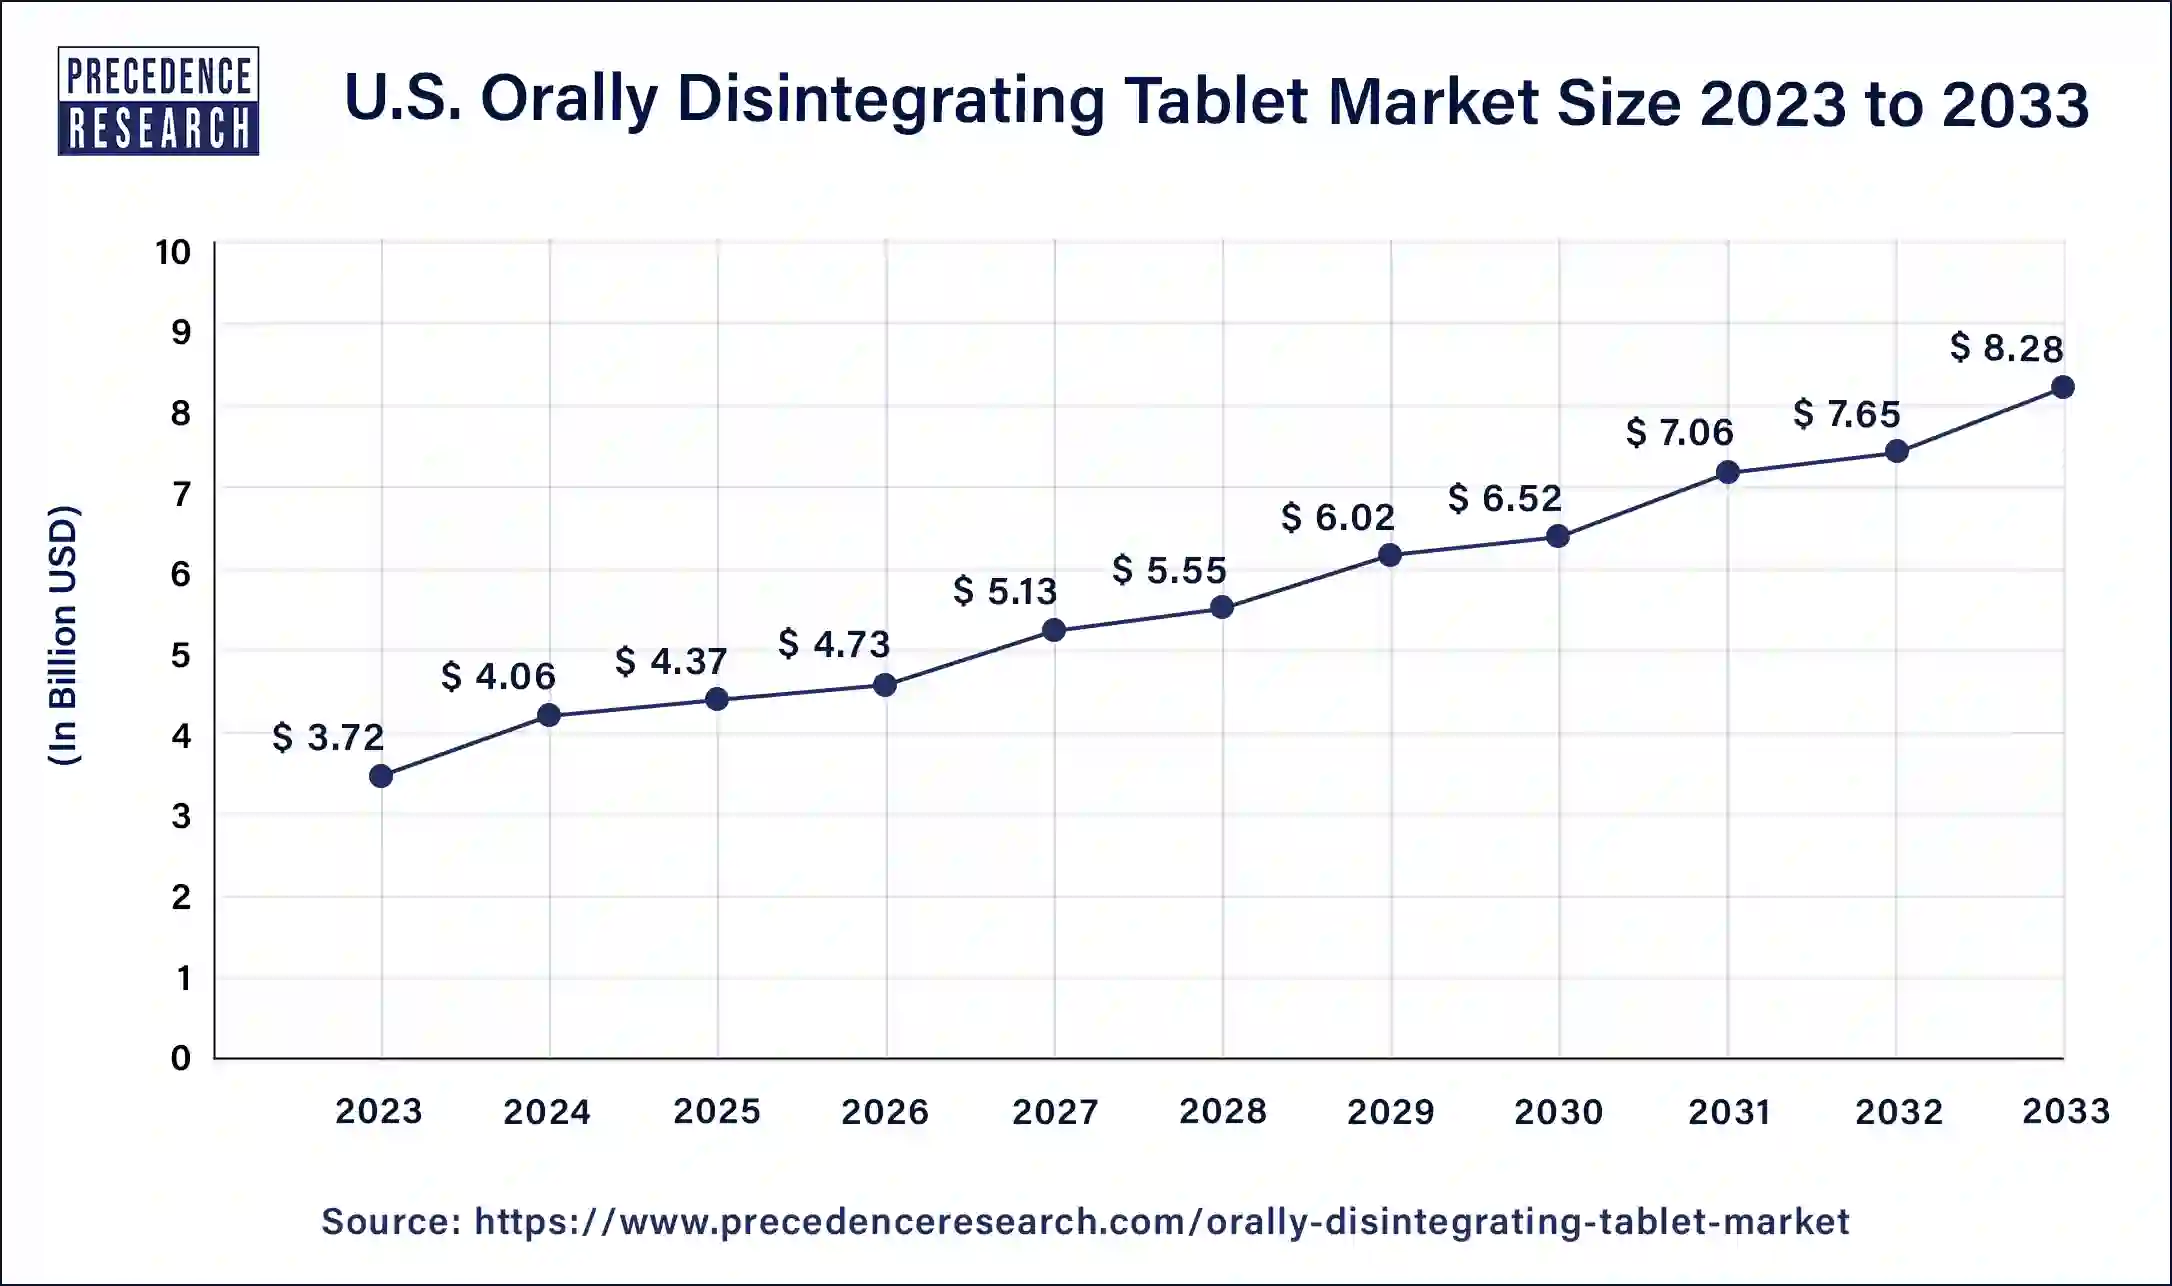 U.S. Orally Disintegrating Tablet Market Size 2024 to 2033